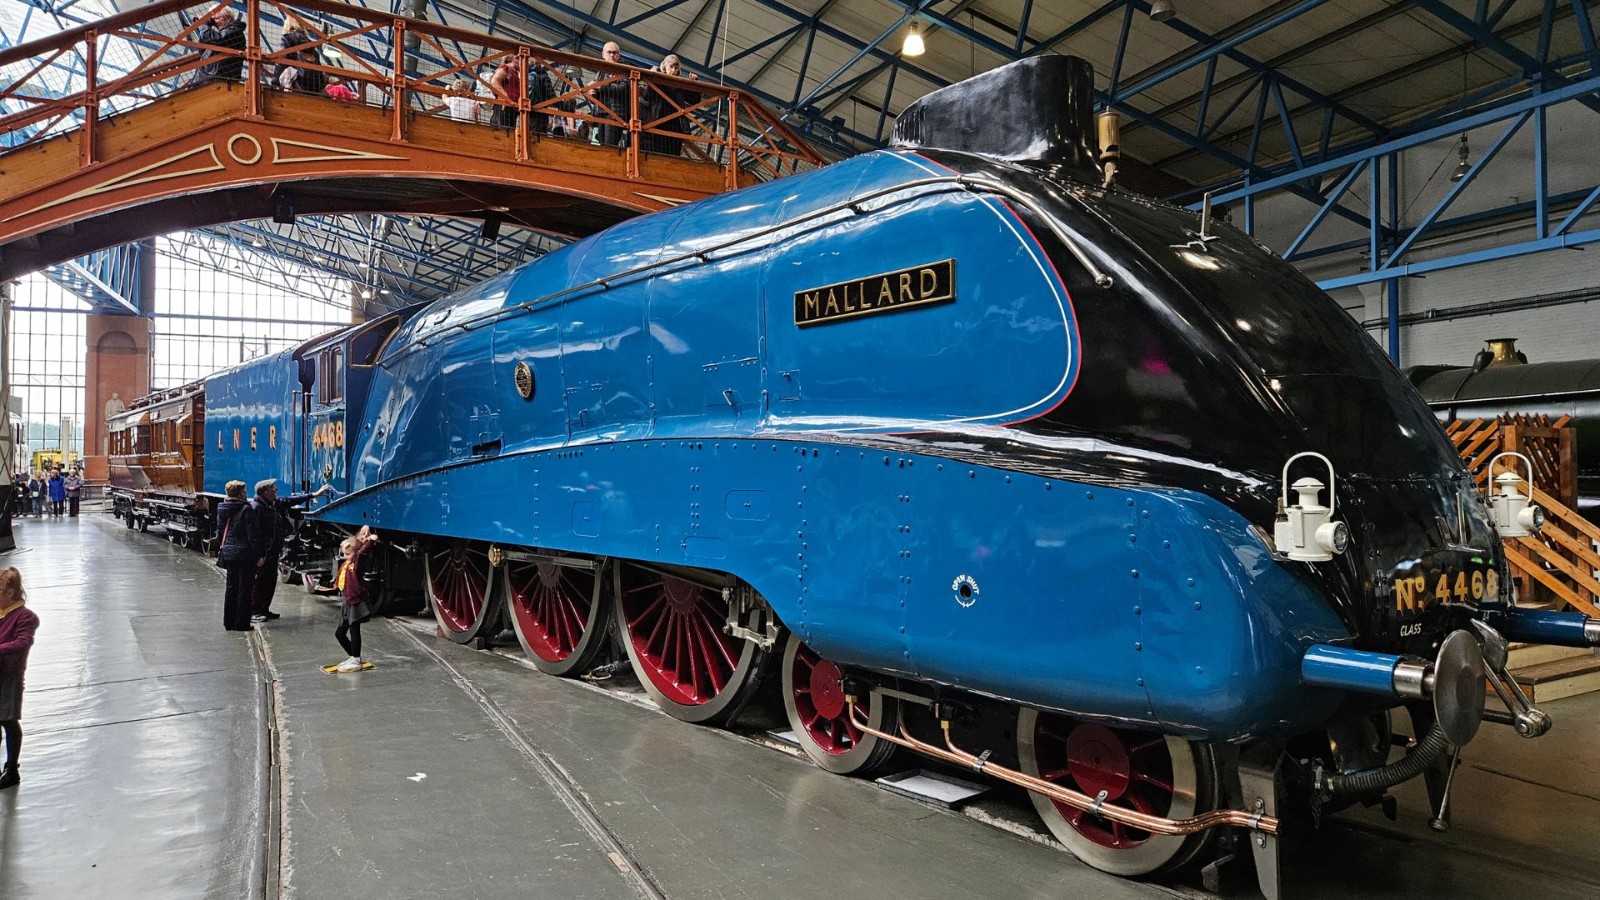 The much-loved Mallard train at the National Railway Museum in York. /CGTN